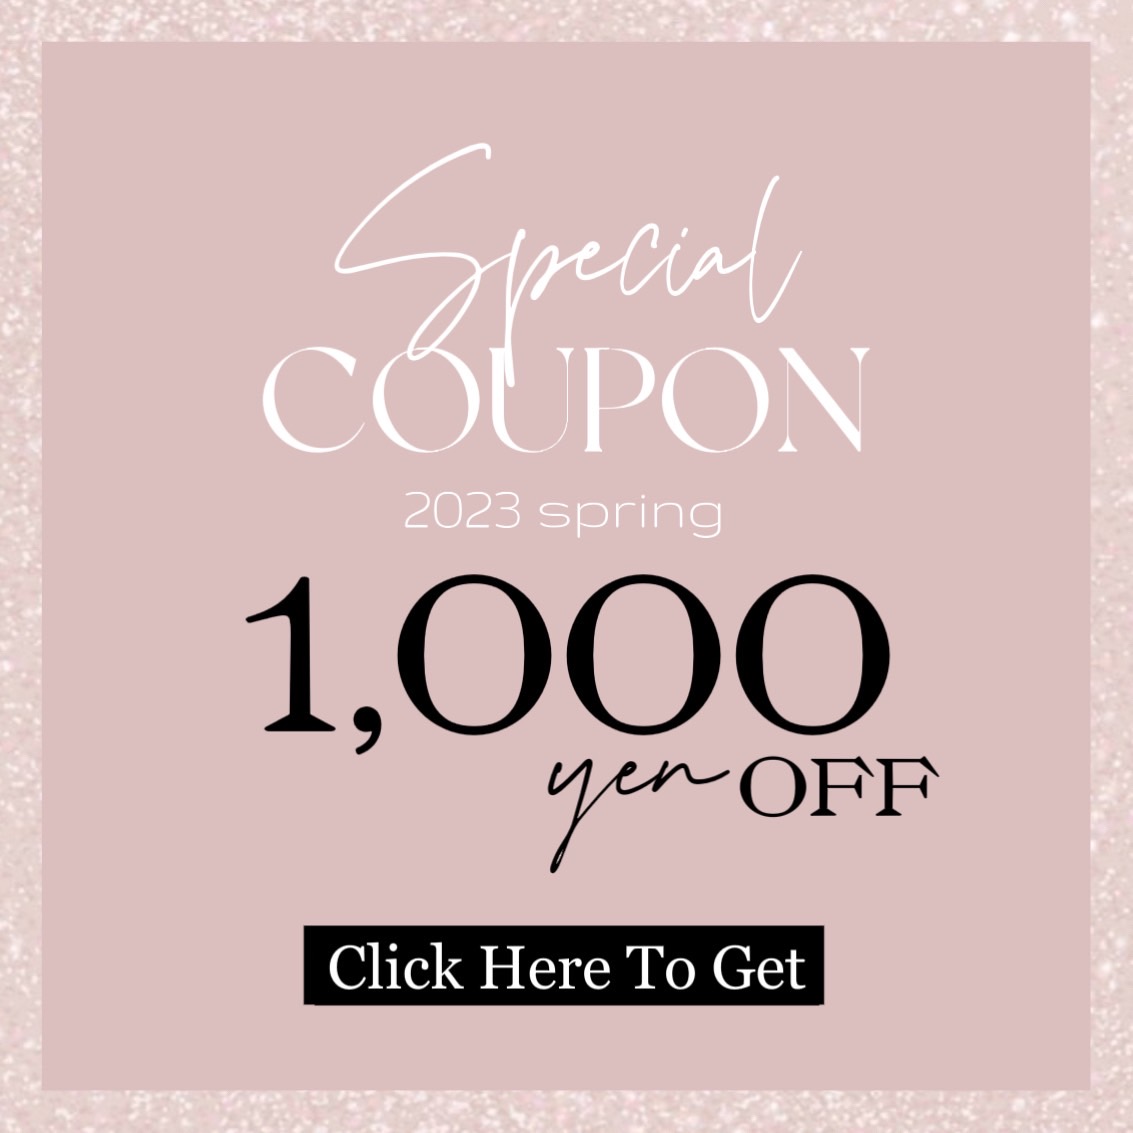 special COUPON -2023 spring-